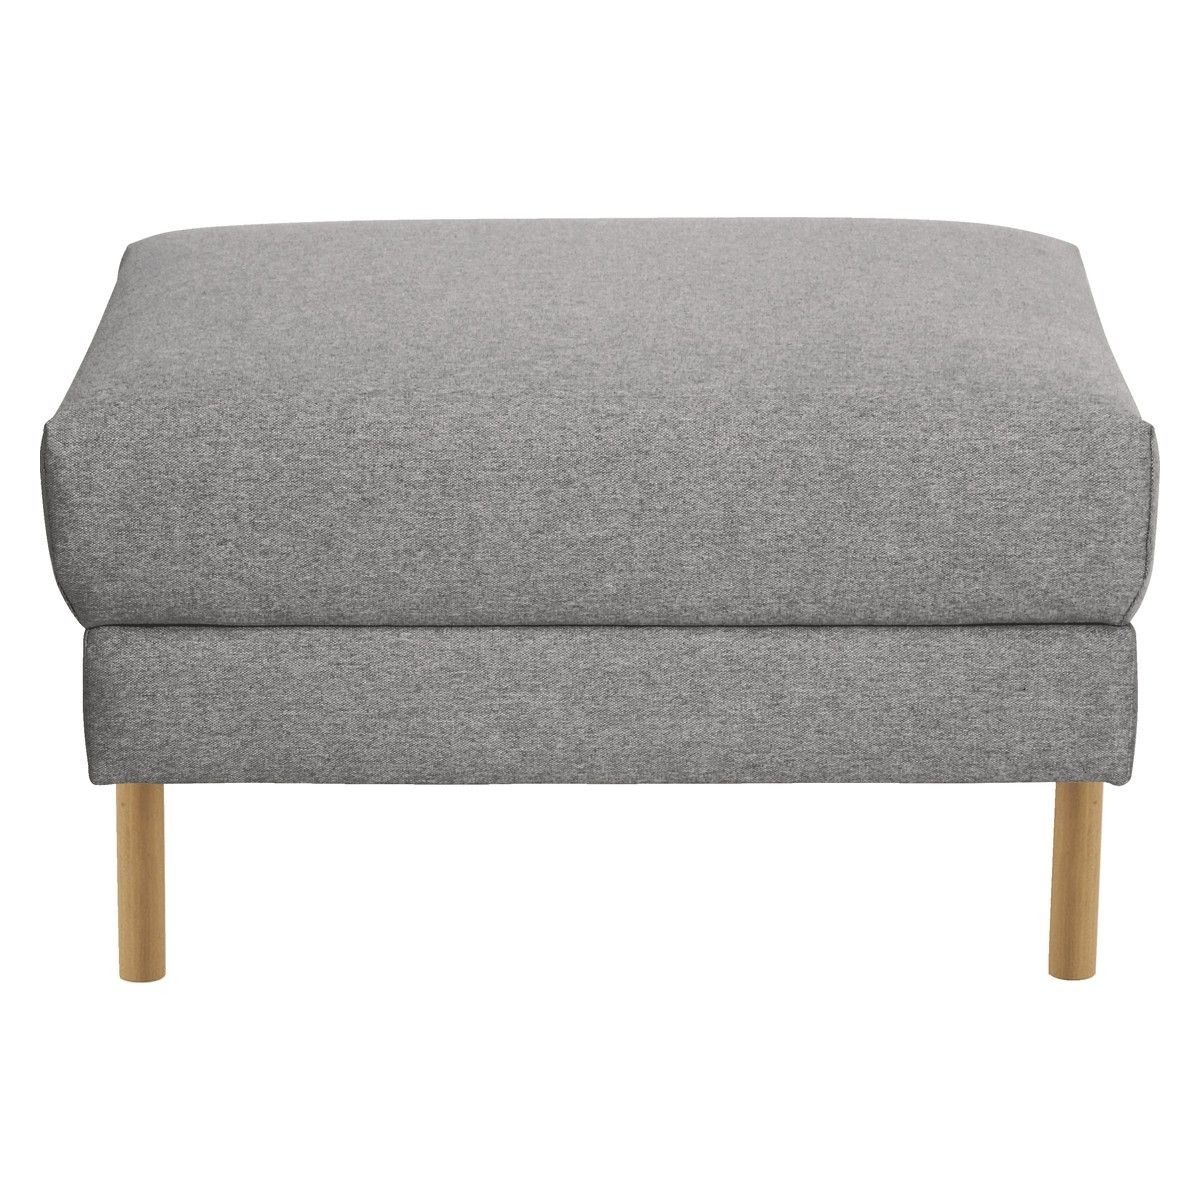 Hyde Grey Fabric Storage Footstool Wooden Legs Buy Now At With Regard To Fabric Footstools (View 11 of 15)